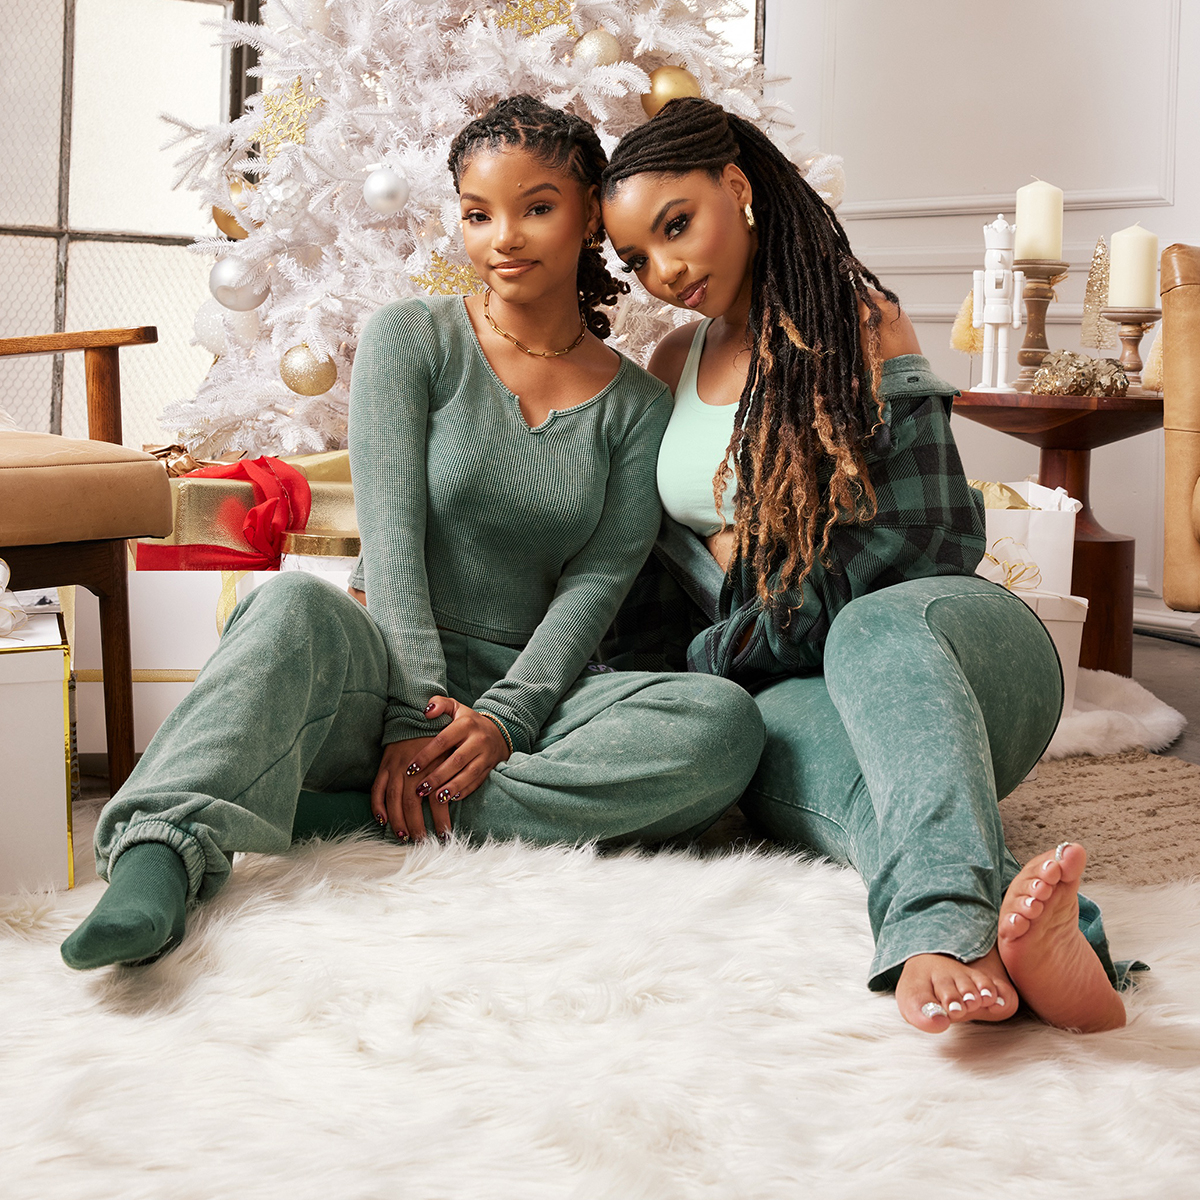 The 12 Best Gifts For Gen-Z, According to Halle and Chlöe Bailey